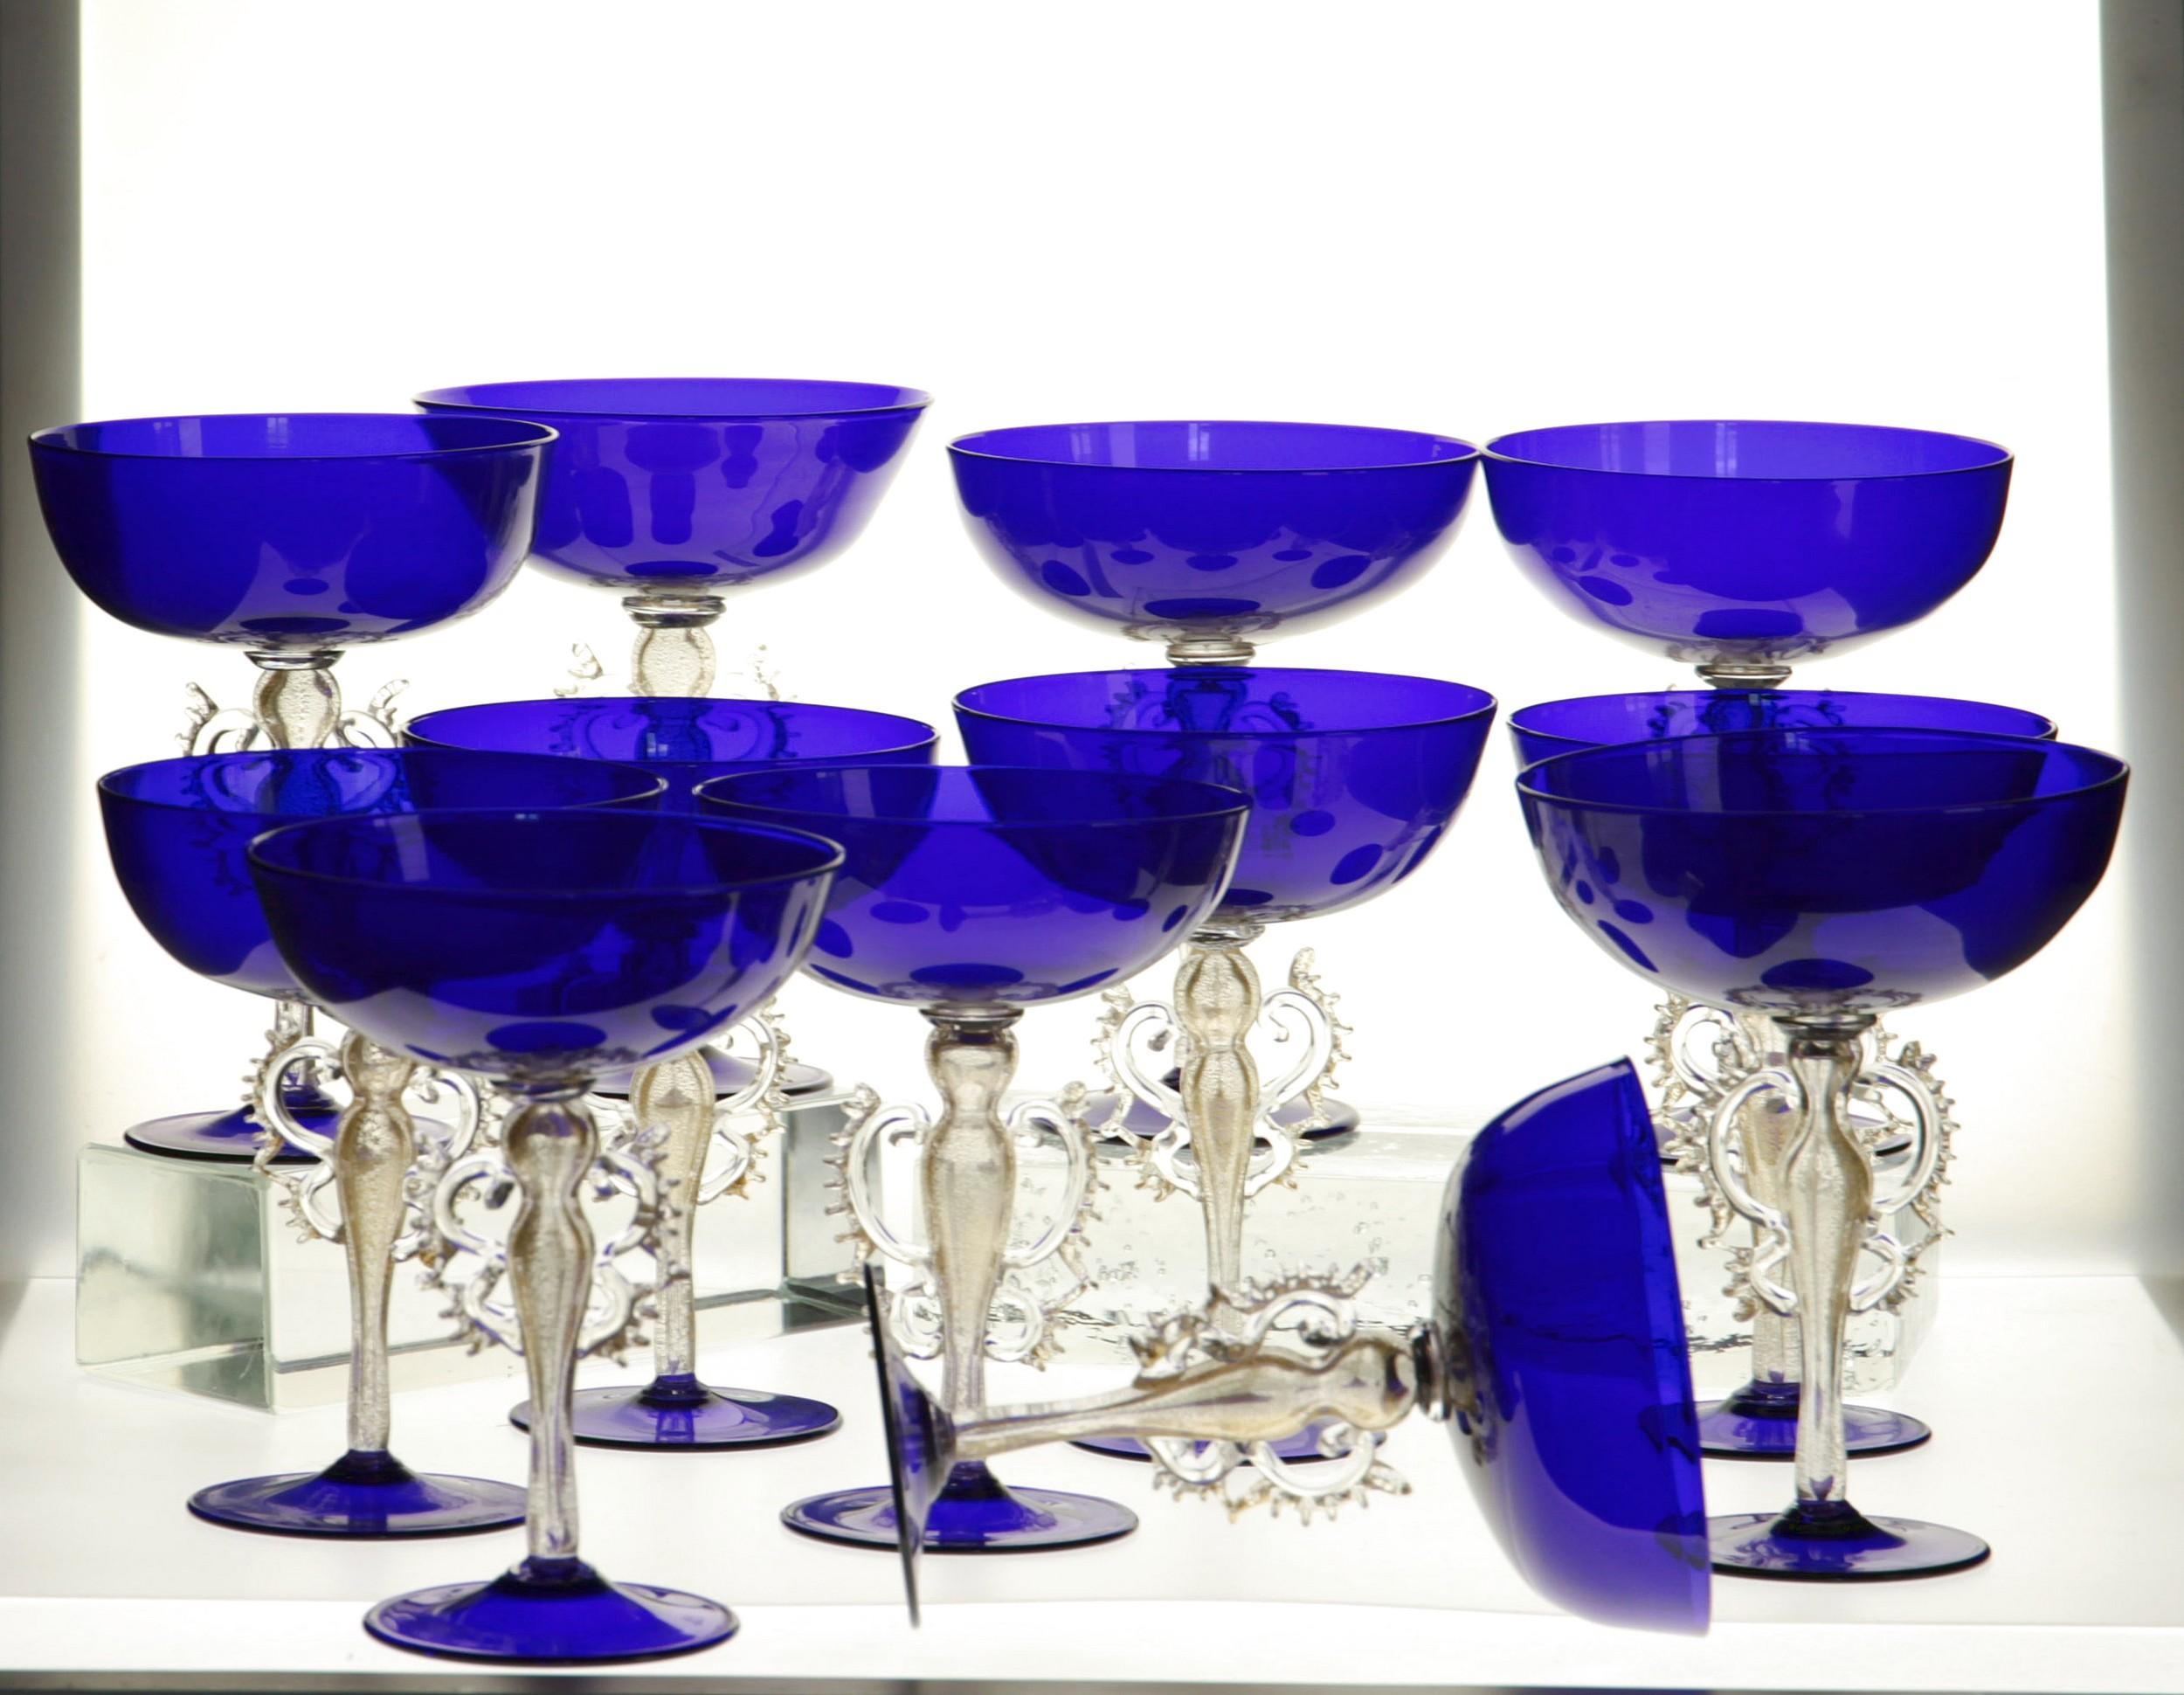 Extremely rare set of glass goblets.

The cup and foot base are in cobalt blue. This style of cup is what was considered a Champagne glass in the 50s and 60s.

There is a complex baroque motif connected to the blown stem of each glass. Every part of